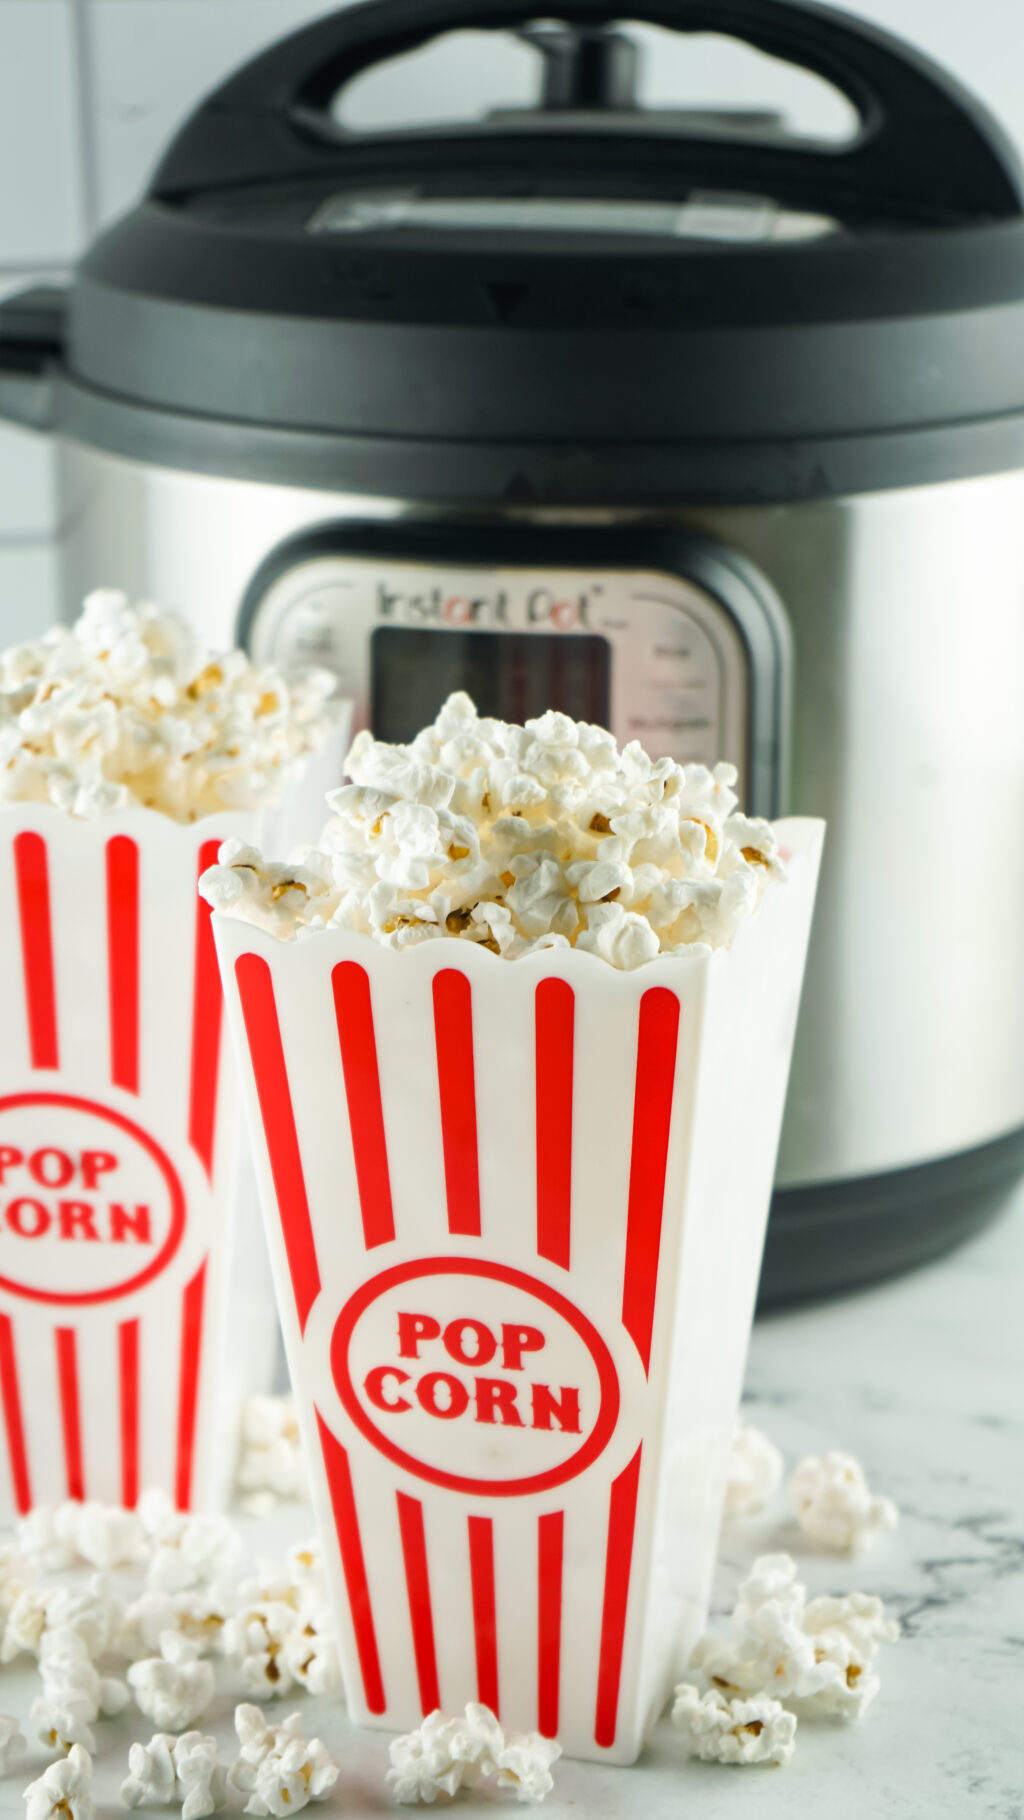 homemade popcorn made in the Instant Pot in a popcorn container